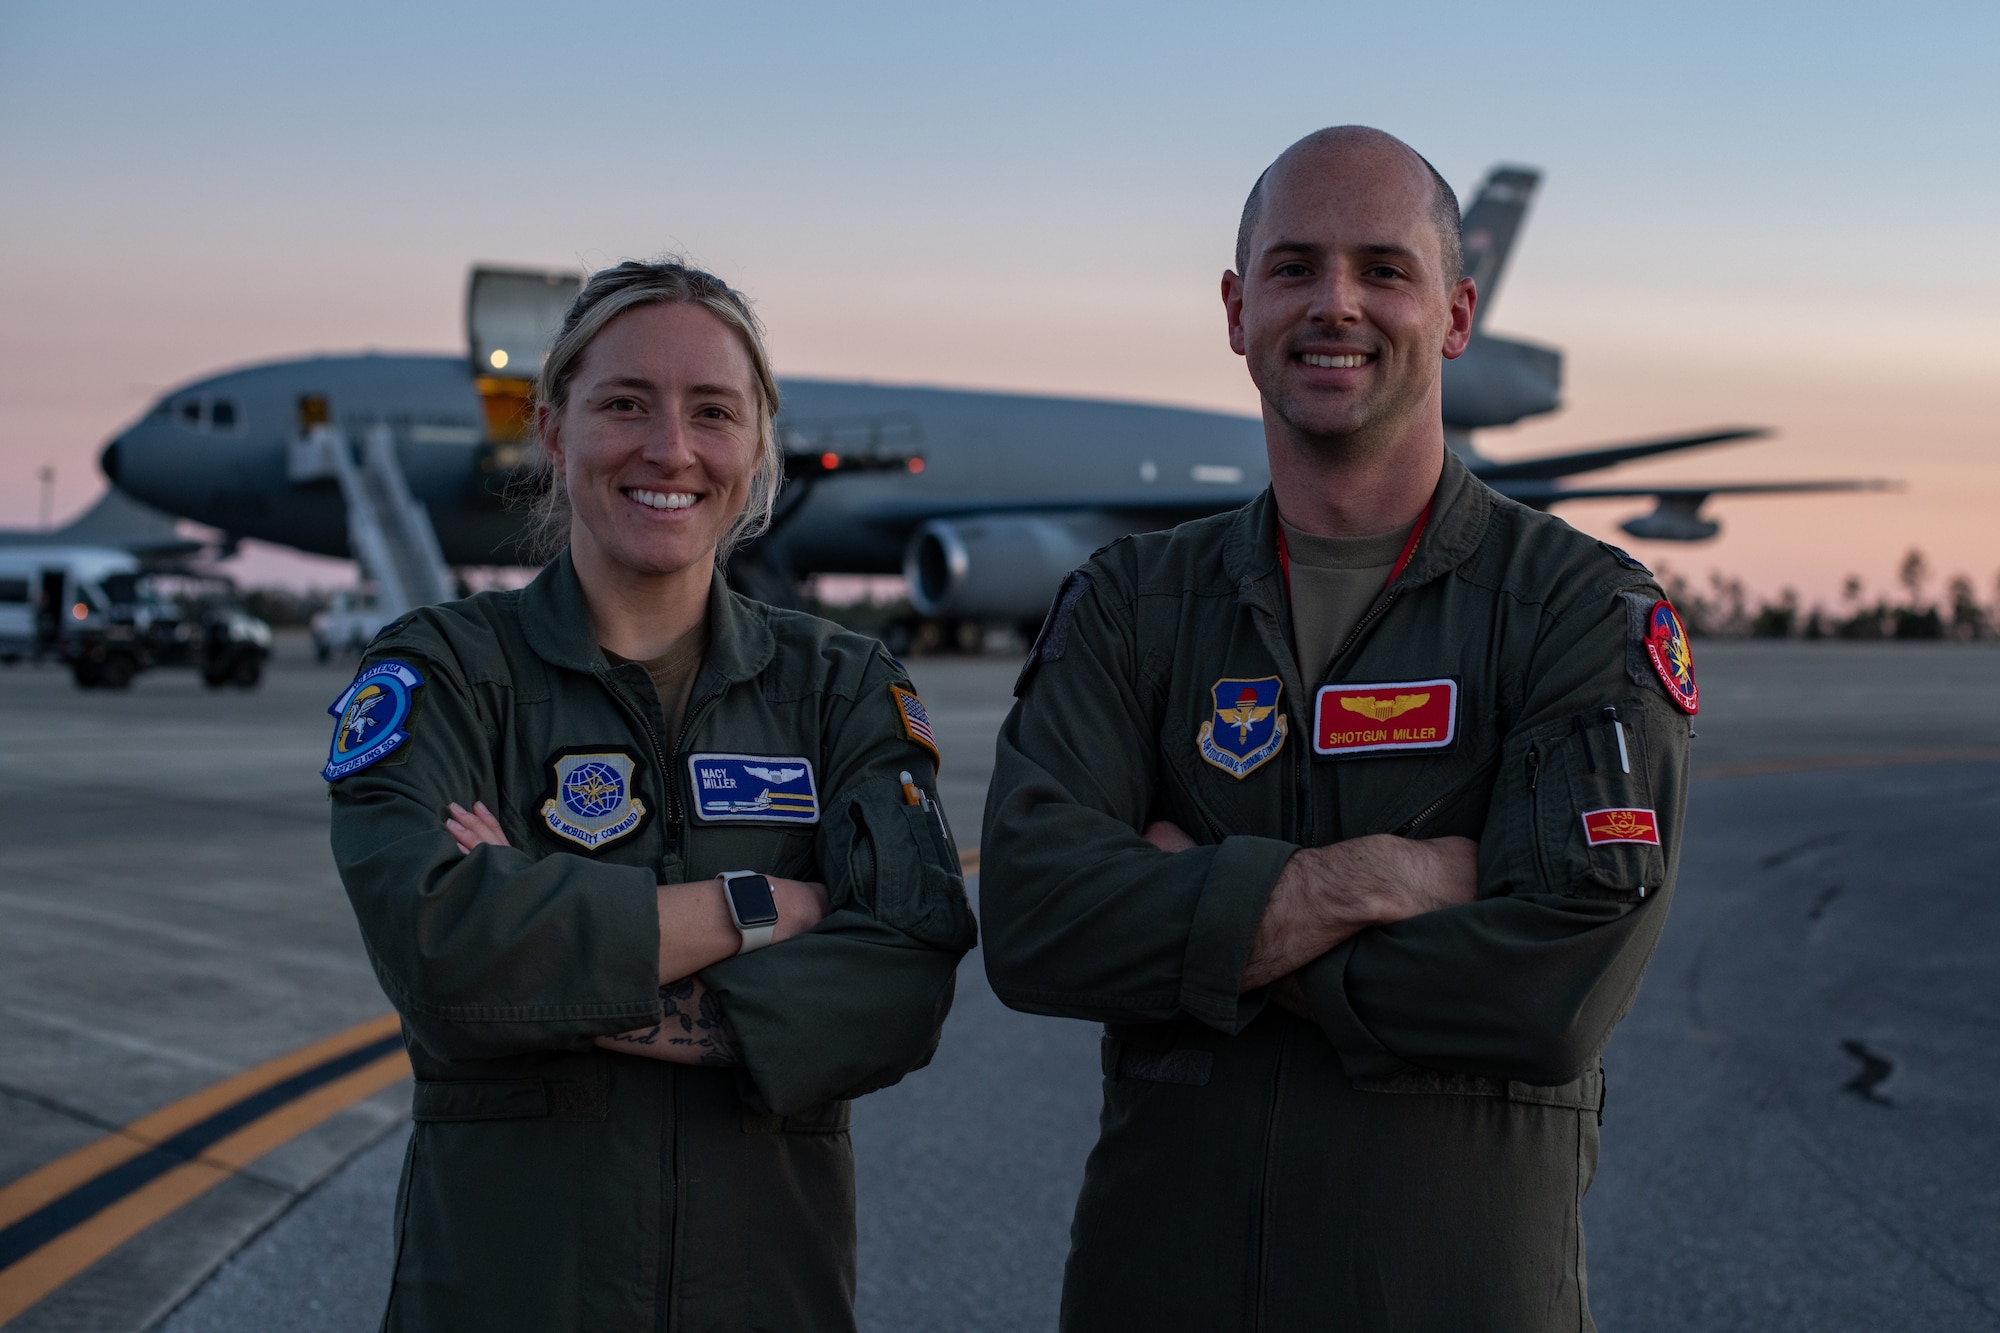 man and woman pose for photo on flight line